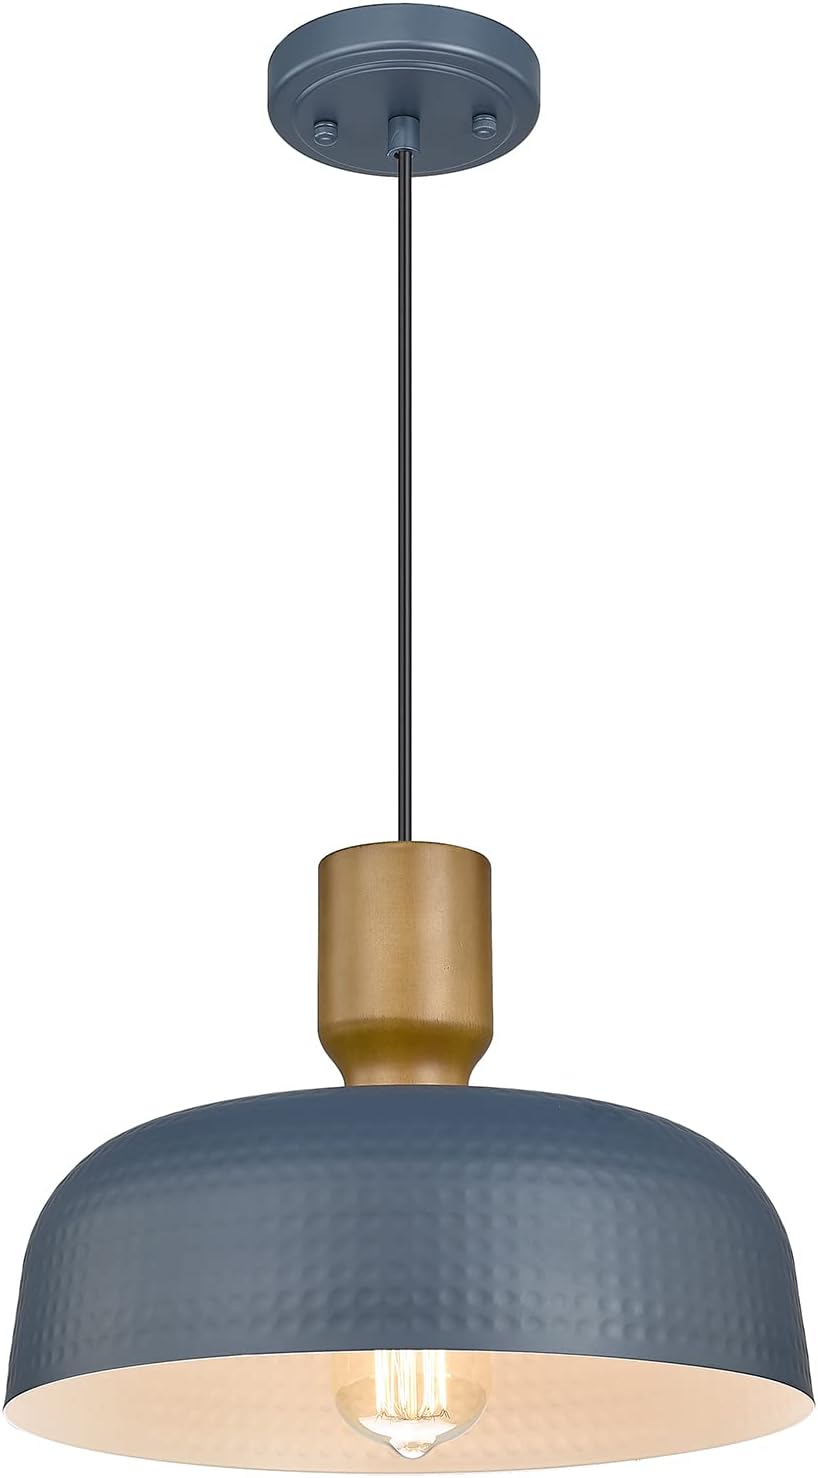 Darkaway Pendant Light Fixtures Ceiling Hanging with Hammered Metal Shade - $30